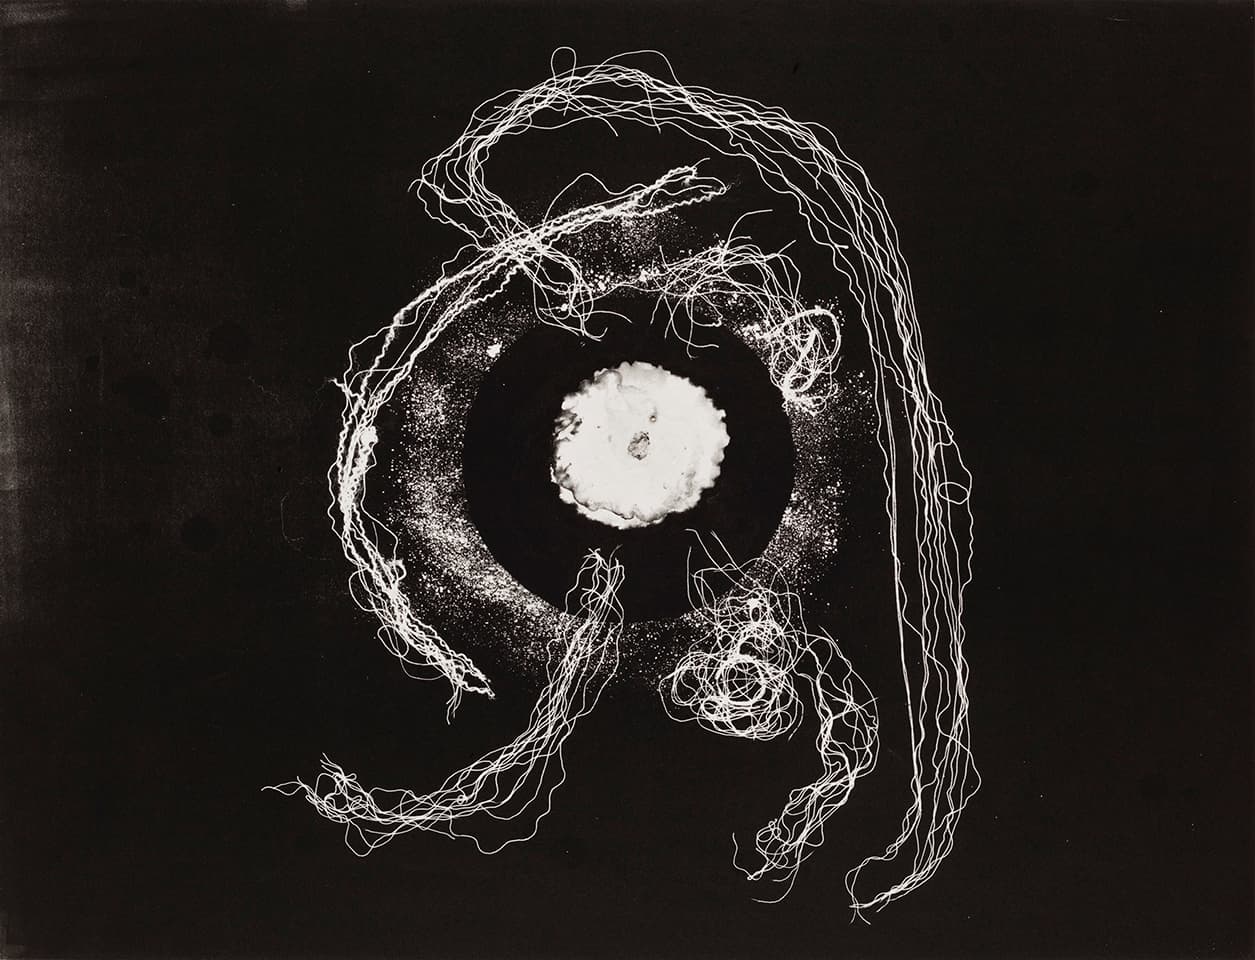 <strong>Heartwork  7</strong>, Susan Aldworth, monoprint, 56 x 76 cms, 2010. Photograph by Peter Abrahams.